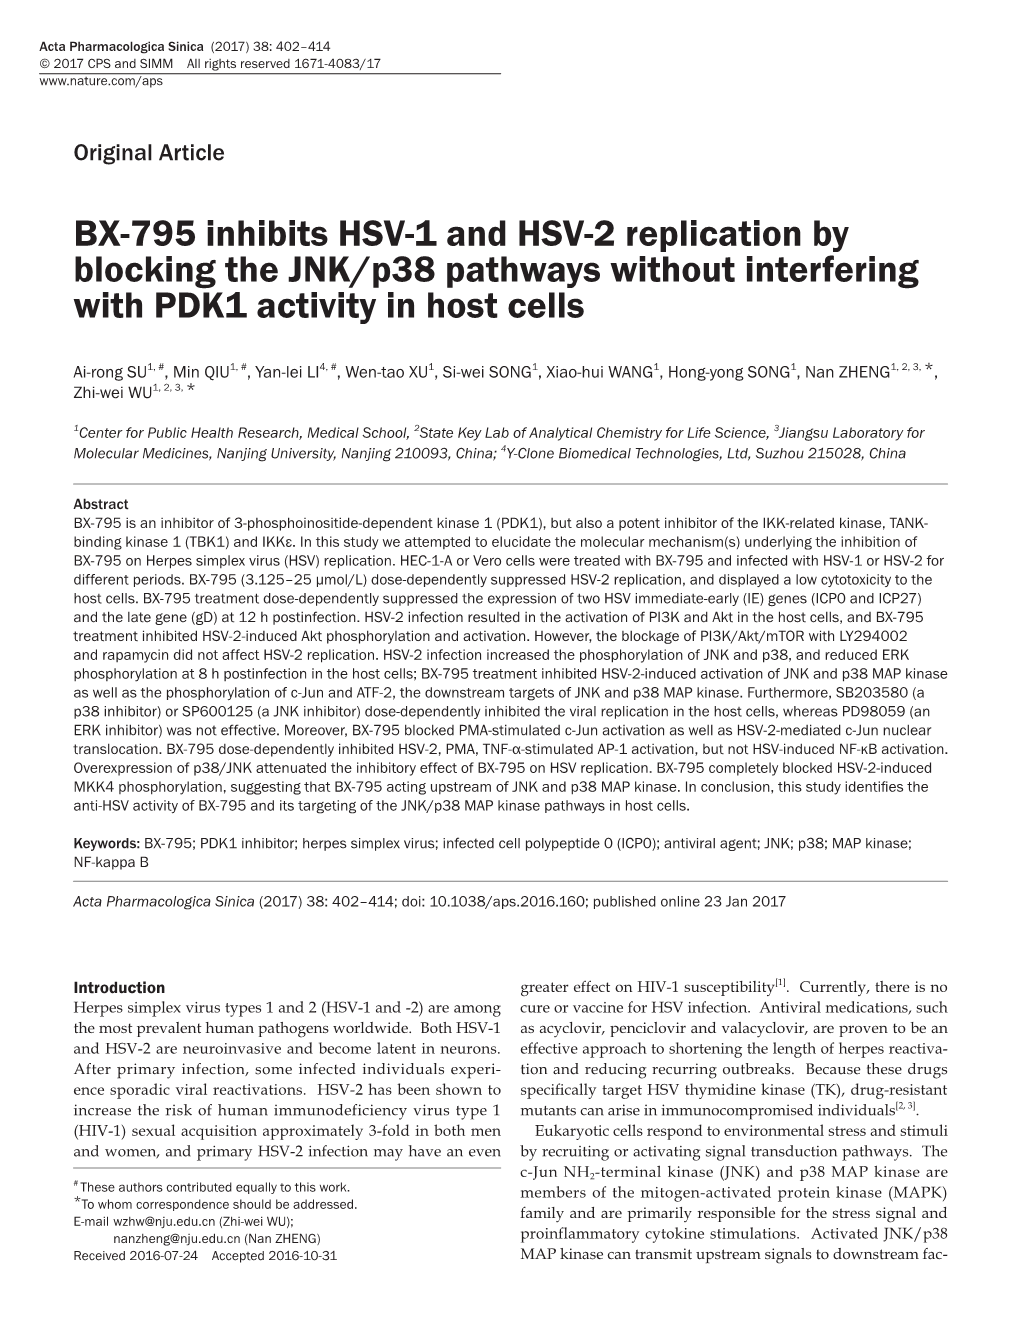 BX-795 Inhibits HSV-1 and HSV-2 Replication by Blocking the JNK/P38 Pathways Without Interfering with PDK1 Activity in Host Cells